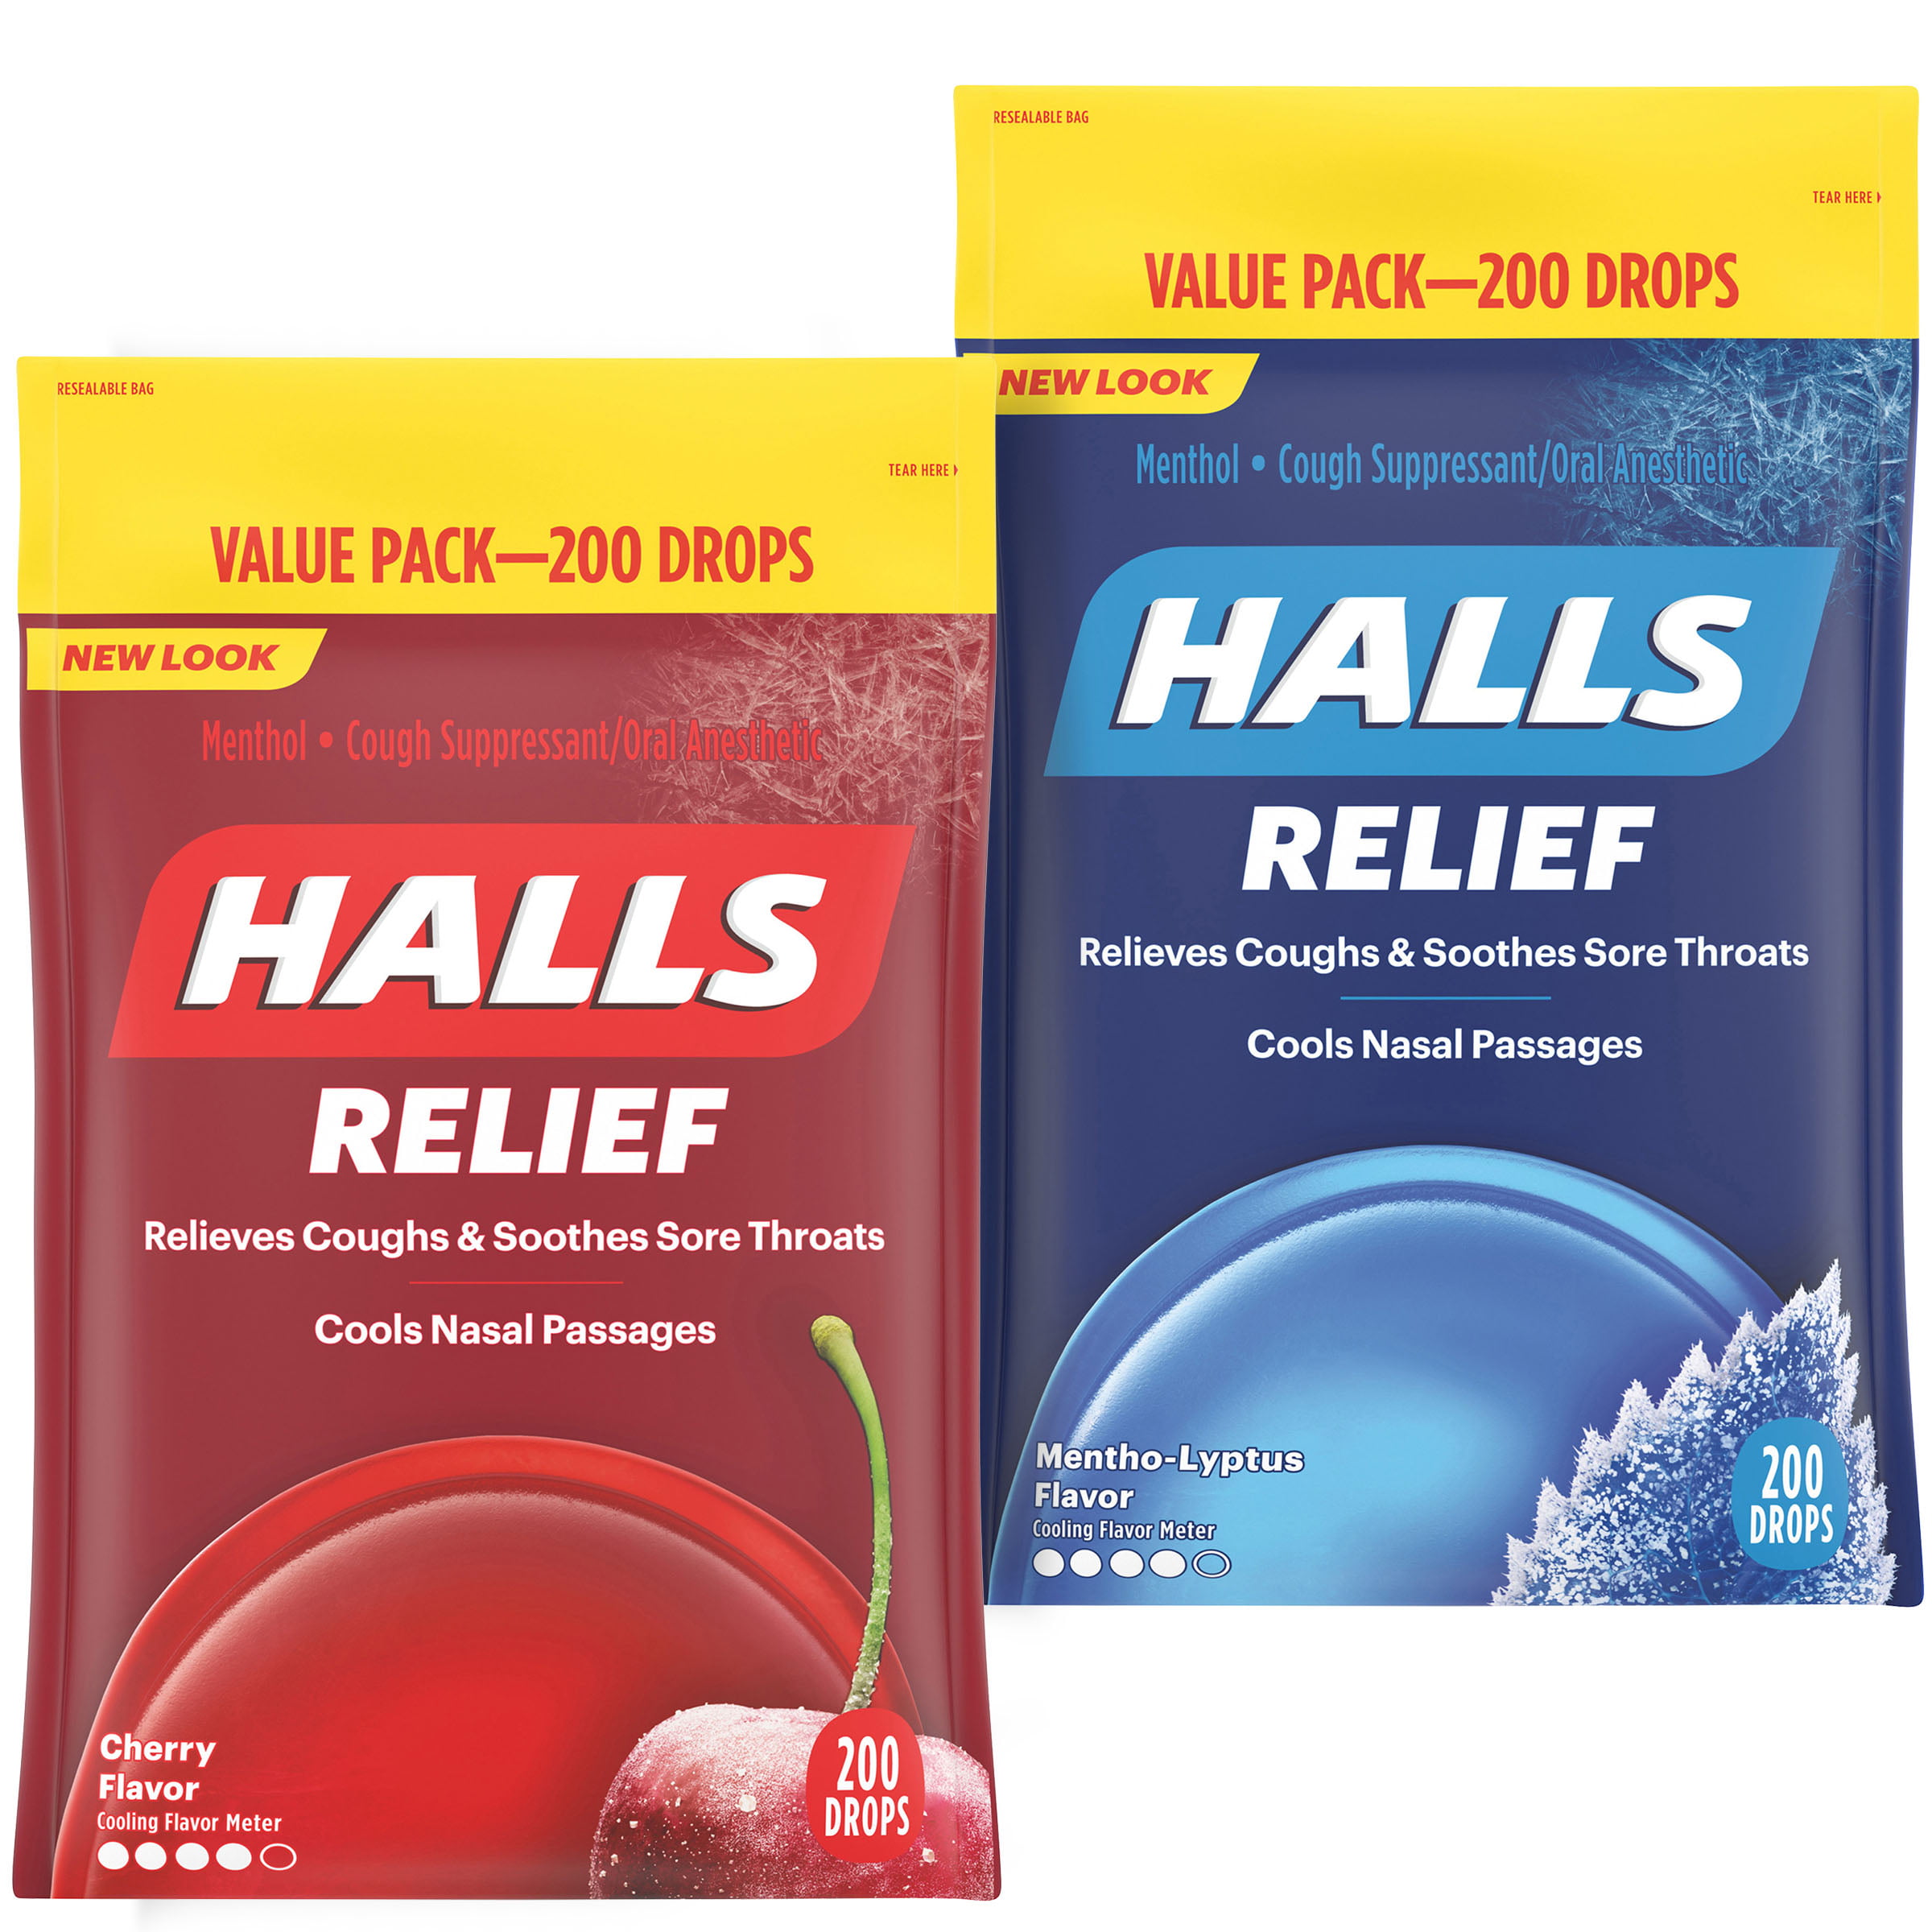 HALLS Relief Variety Pack, Cherry and Mentho-Lyptus Cough Drops, 2 Value Packs of 200 Drops (400 Drops Total)